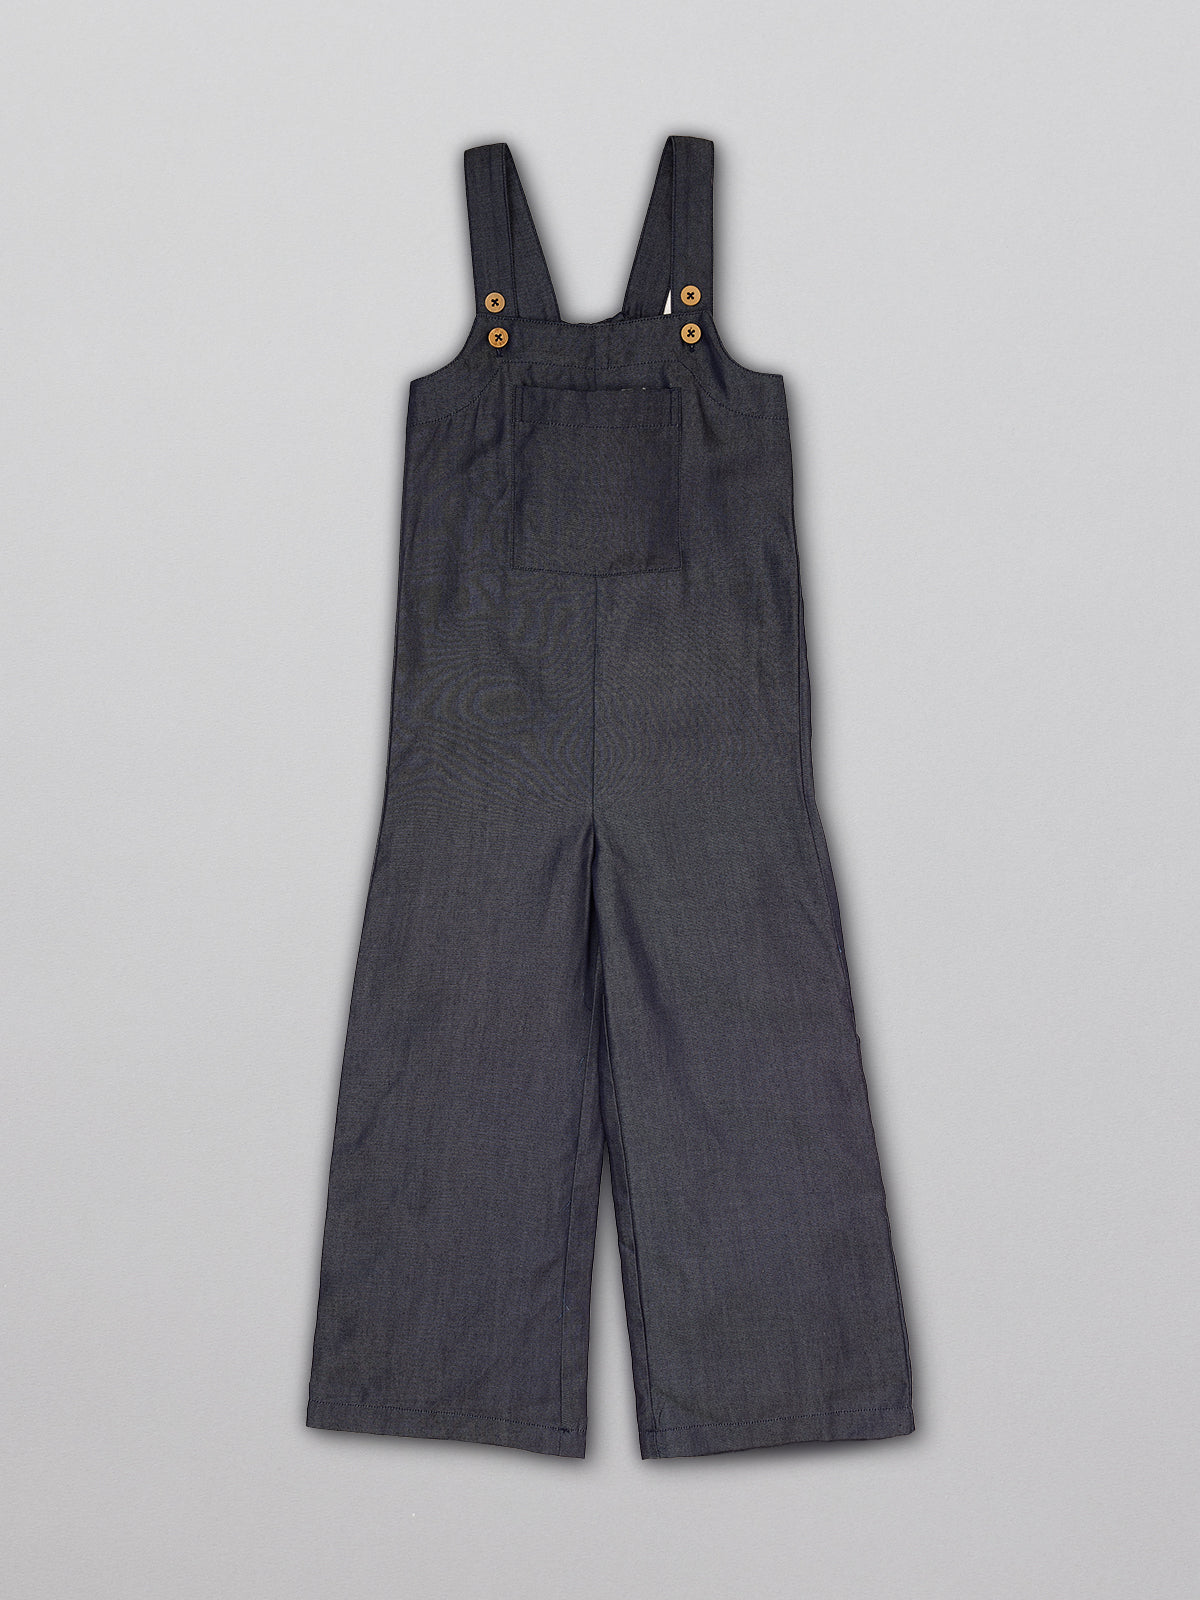 Sustainable dungarees for kids  with a large front pocket and adjustable straps, pictured from the front.